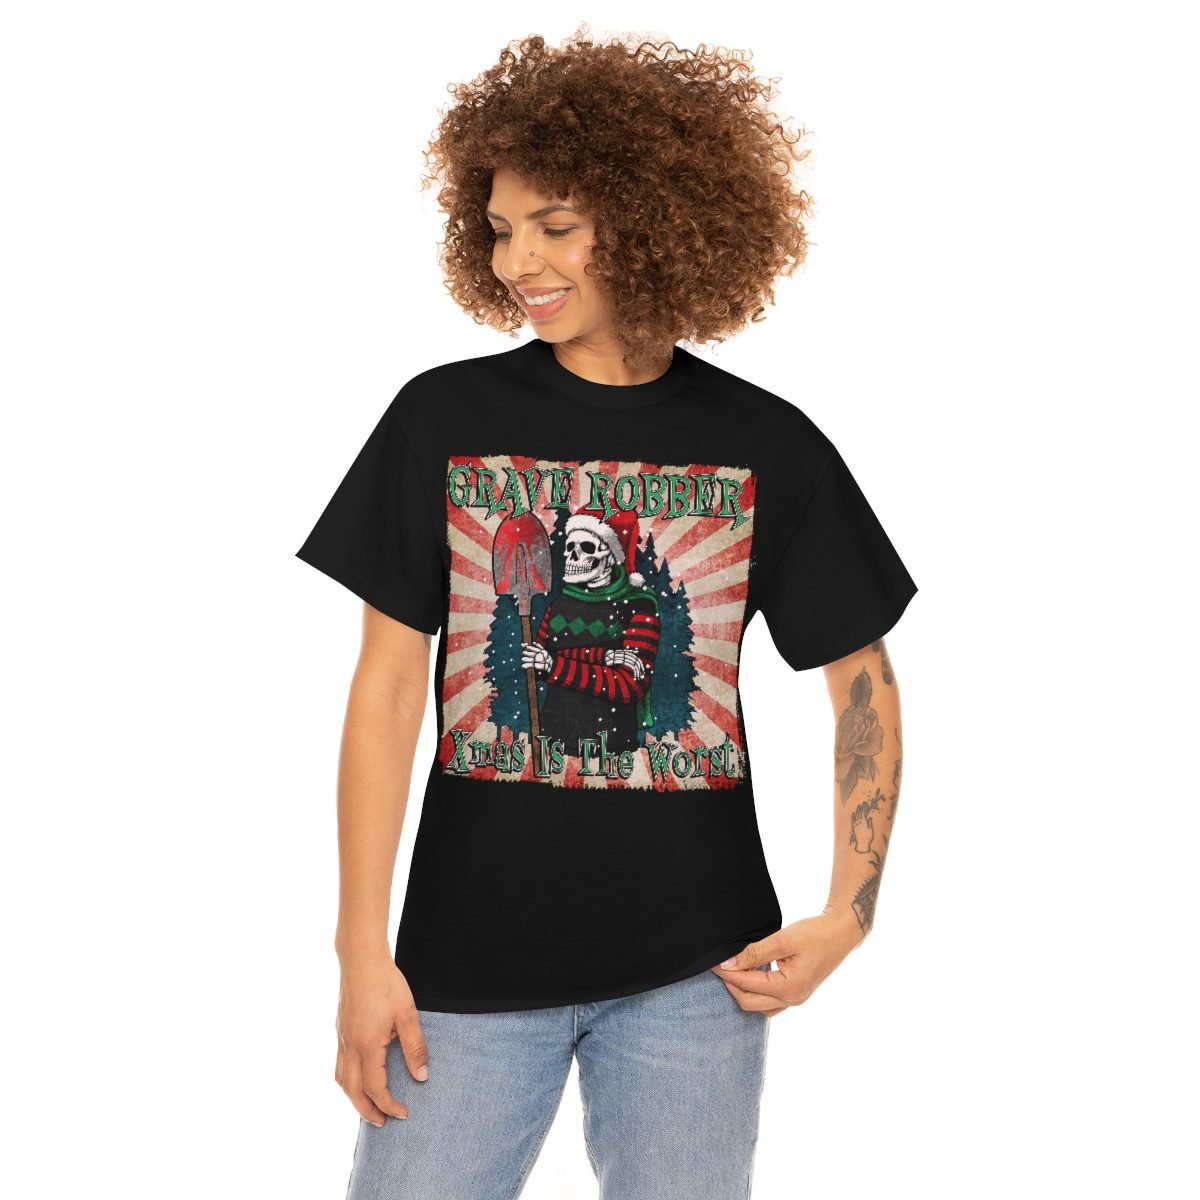 Grave Robber – Xmas Is The Worst Short Sleeve Tshirt (5000)